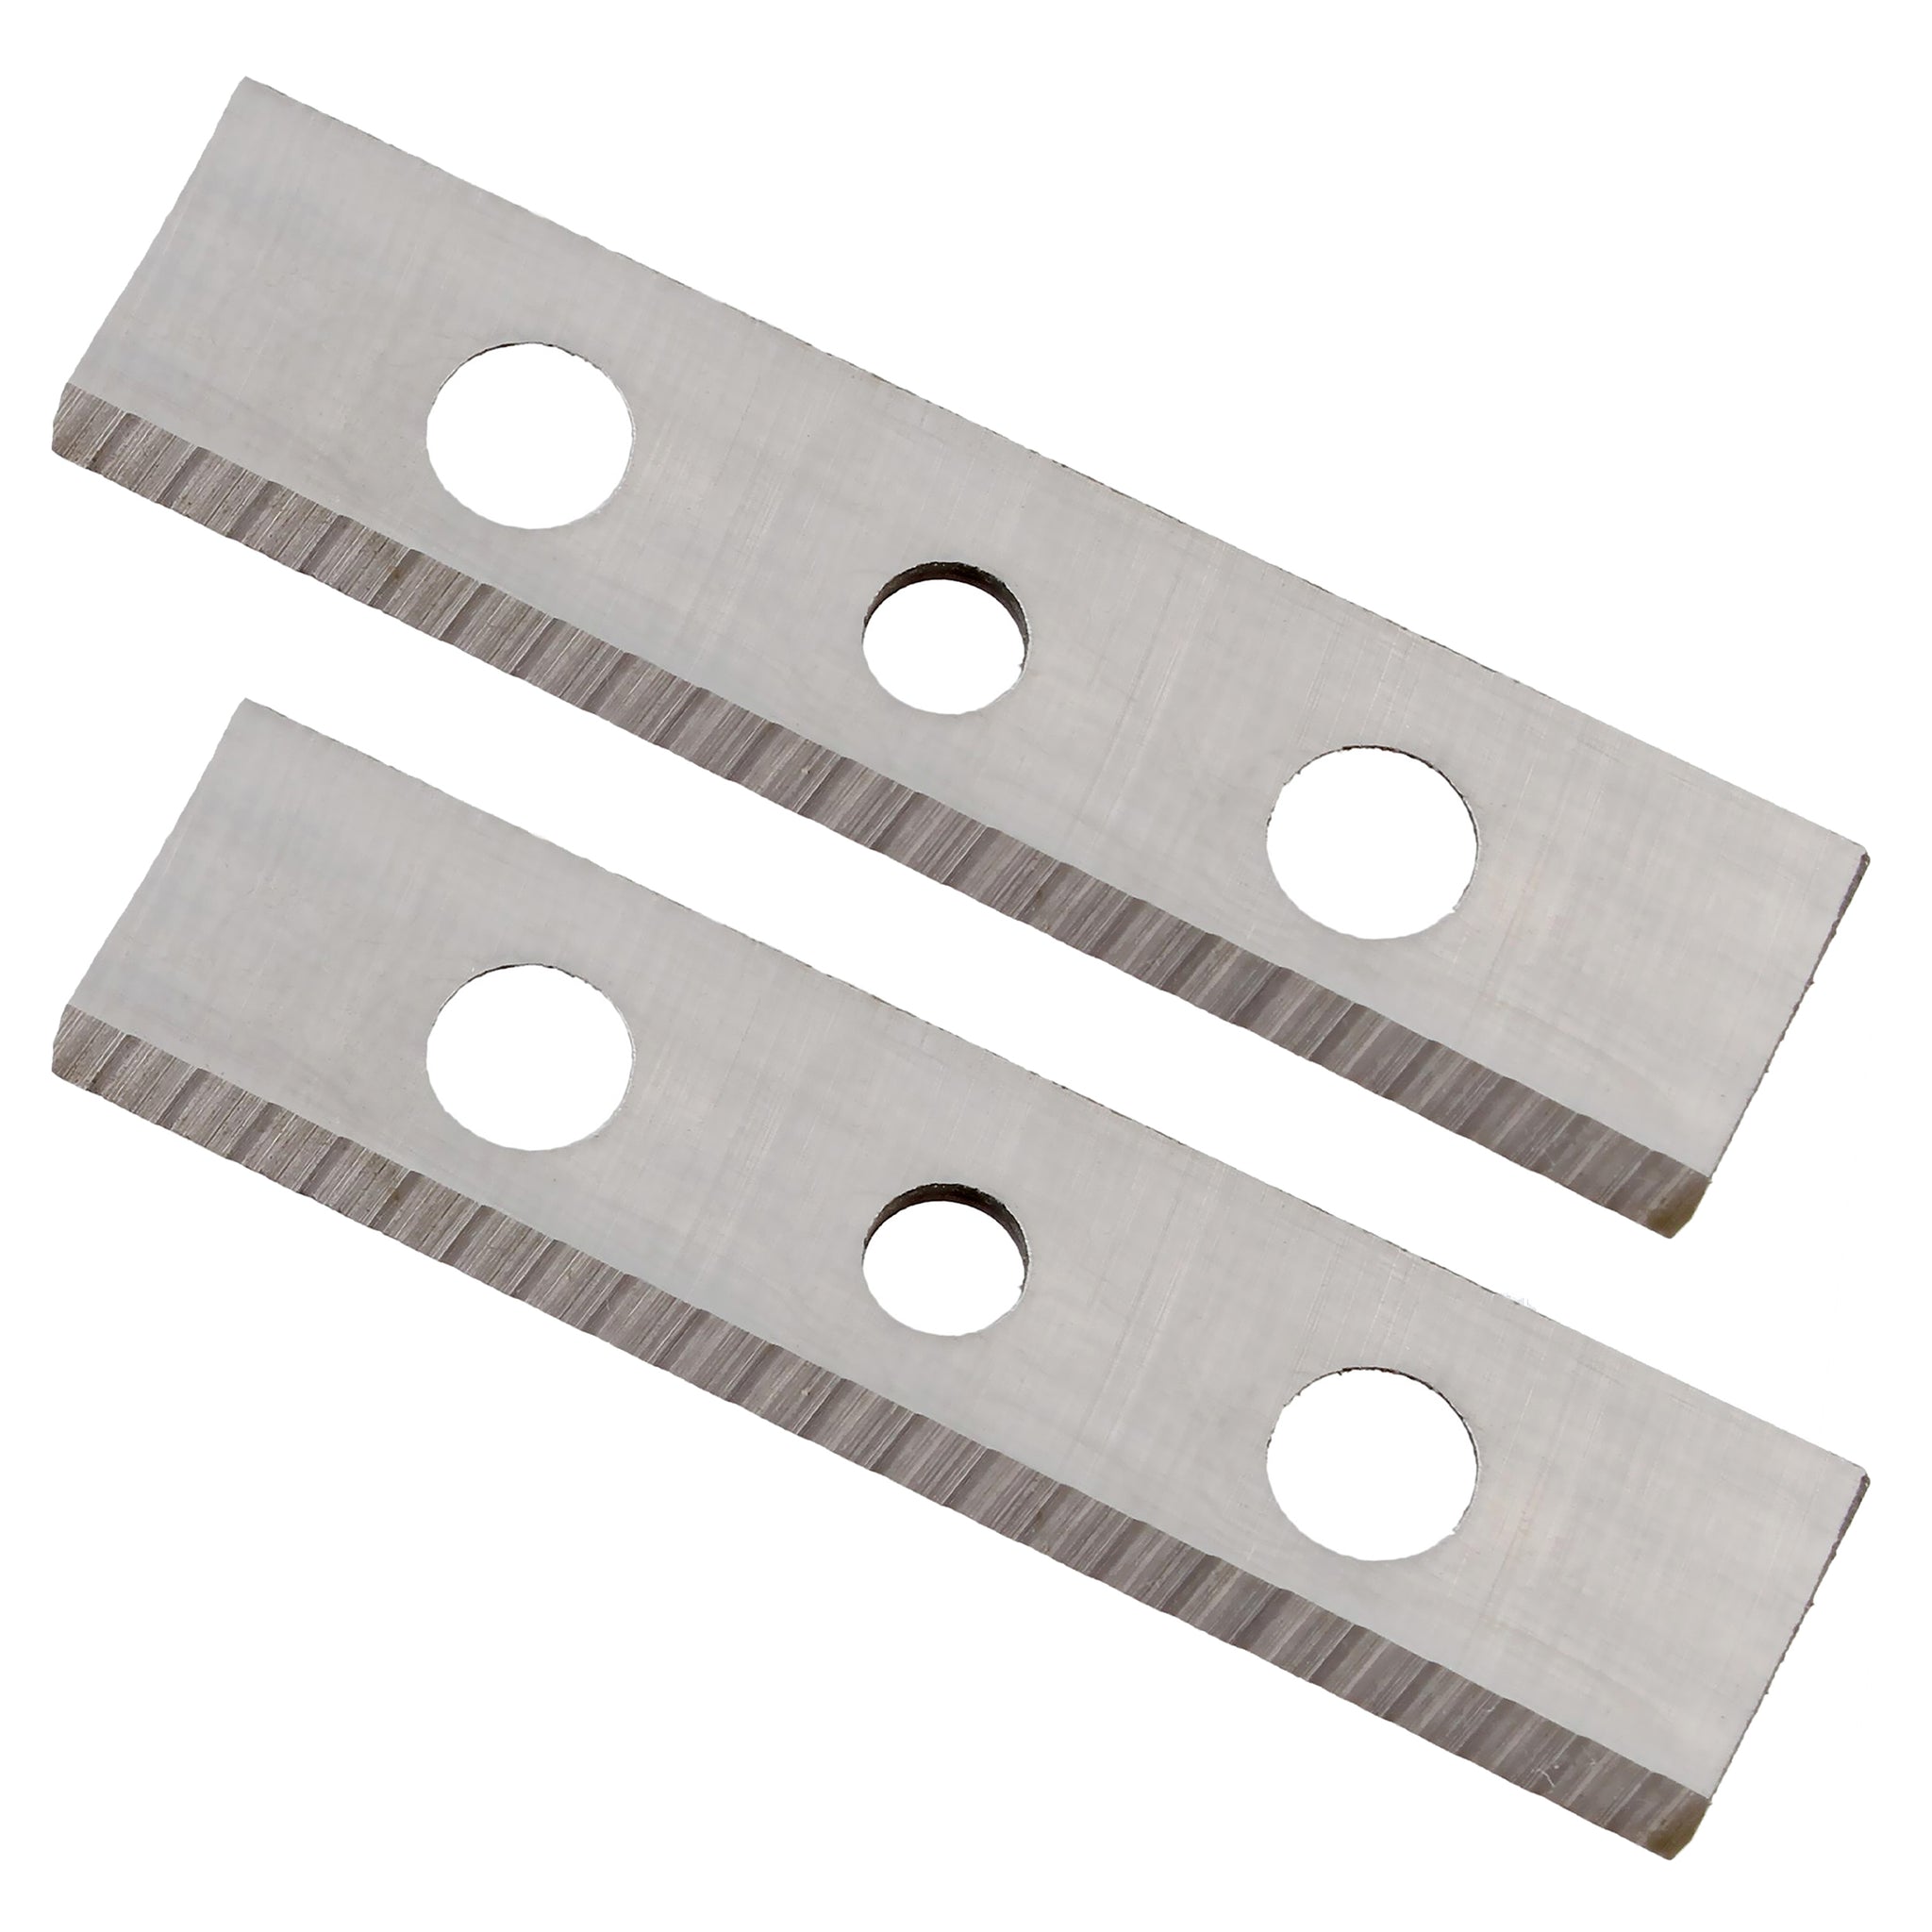 Edge Banding Trimmer Accessories – End Cutter and Replacement